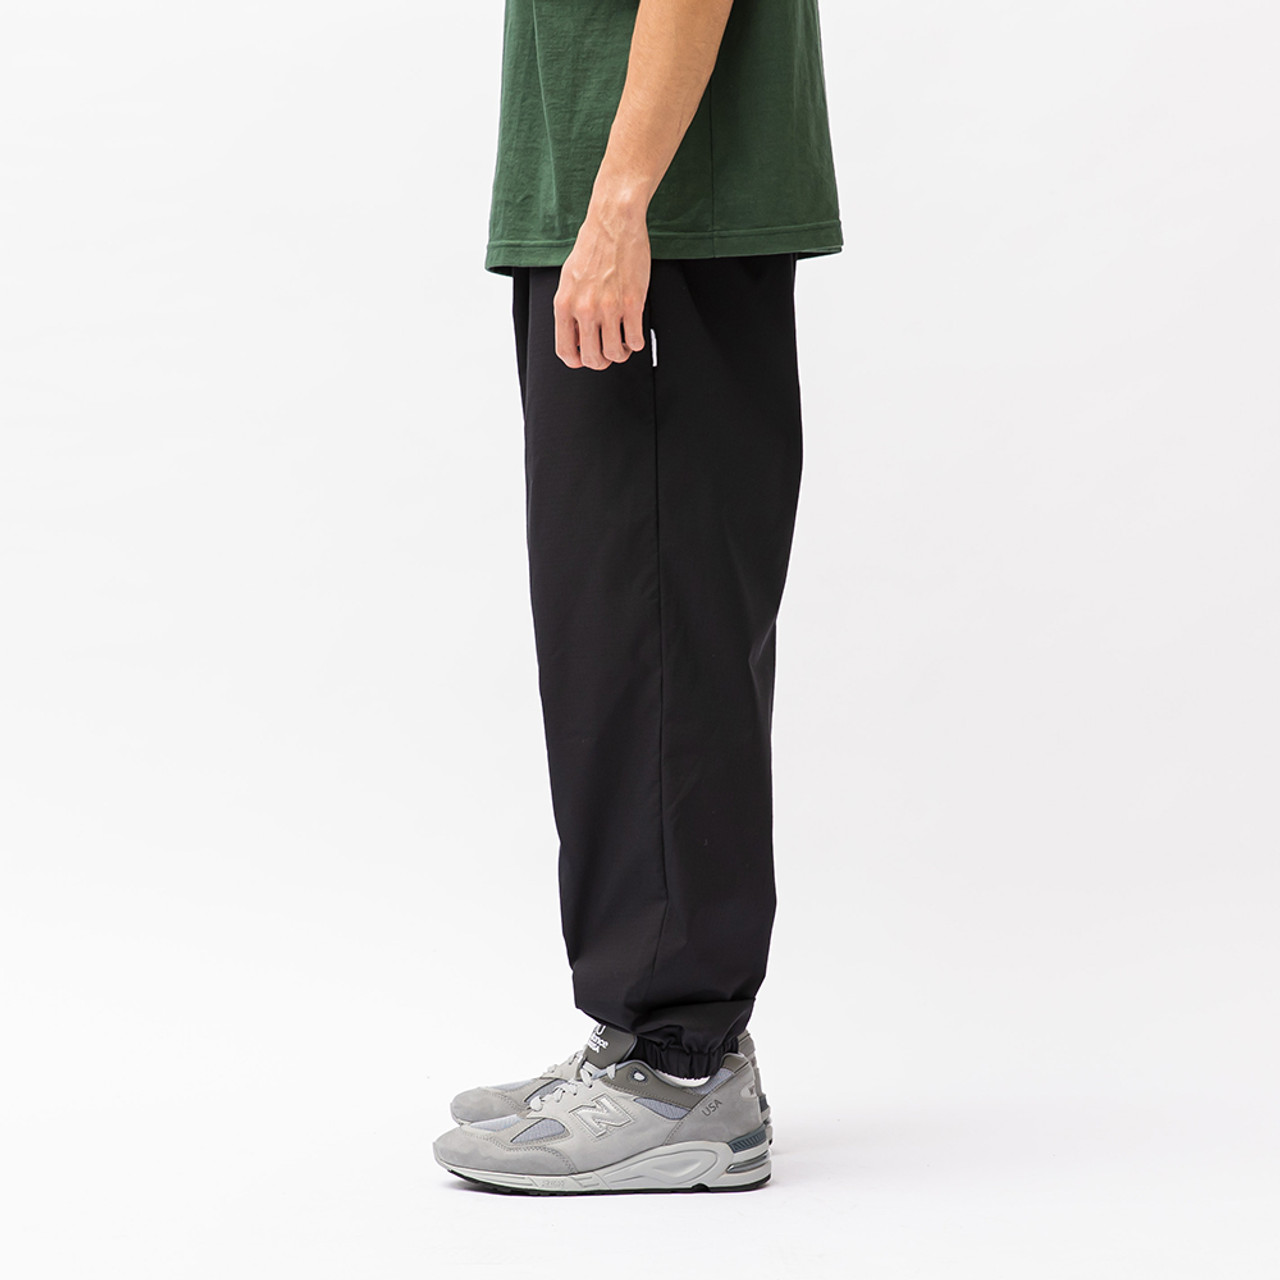 WTAPS Trousers INCOM 01 / TROUSERS / CTPL. RIPSTOP. WTVUA